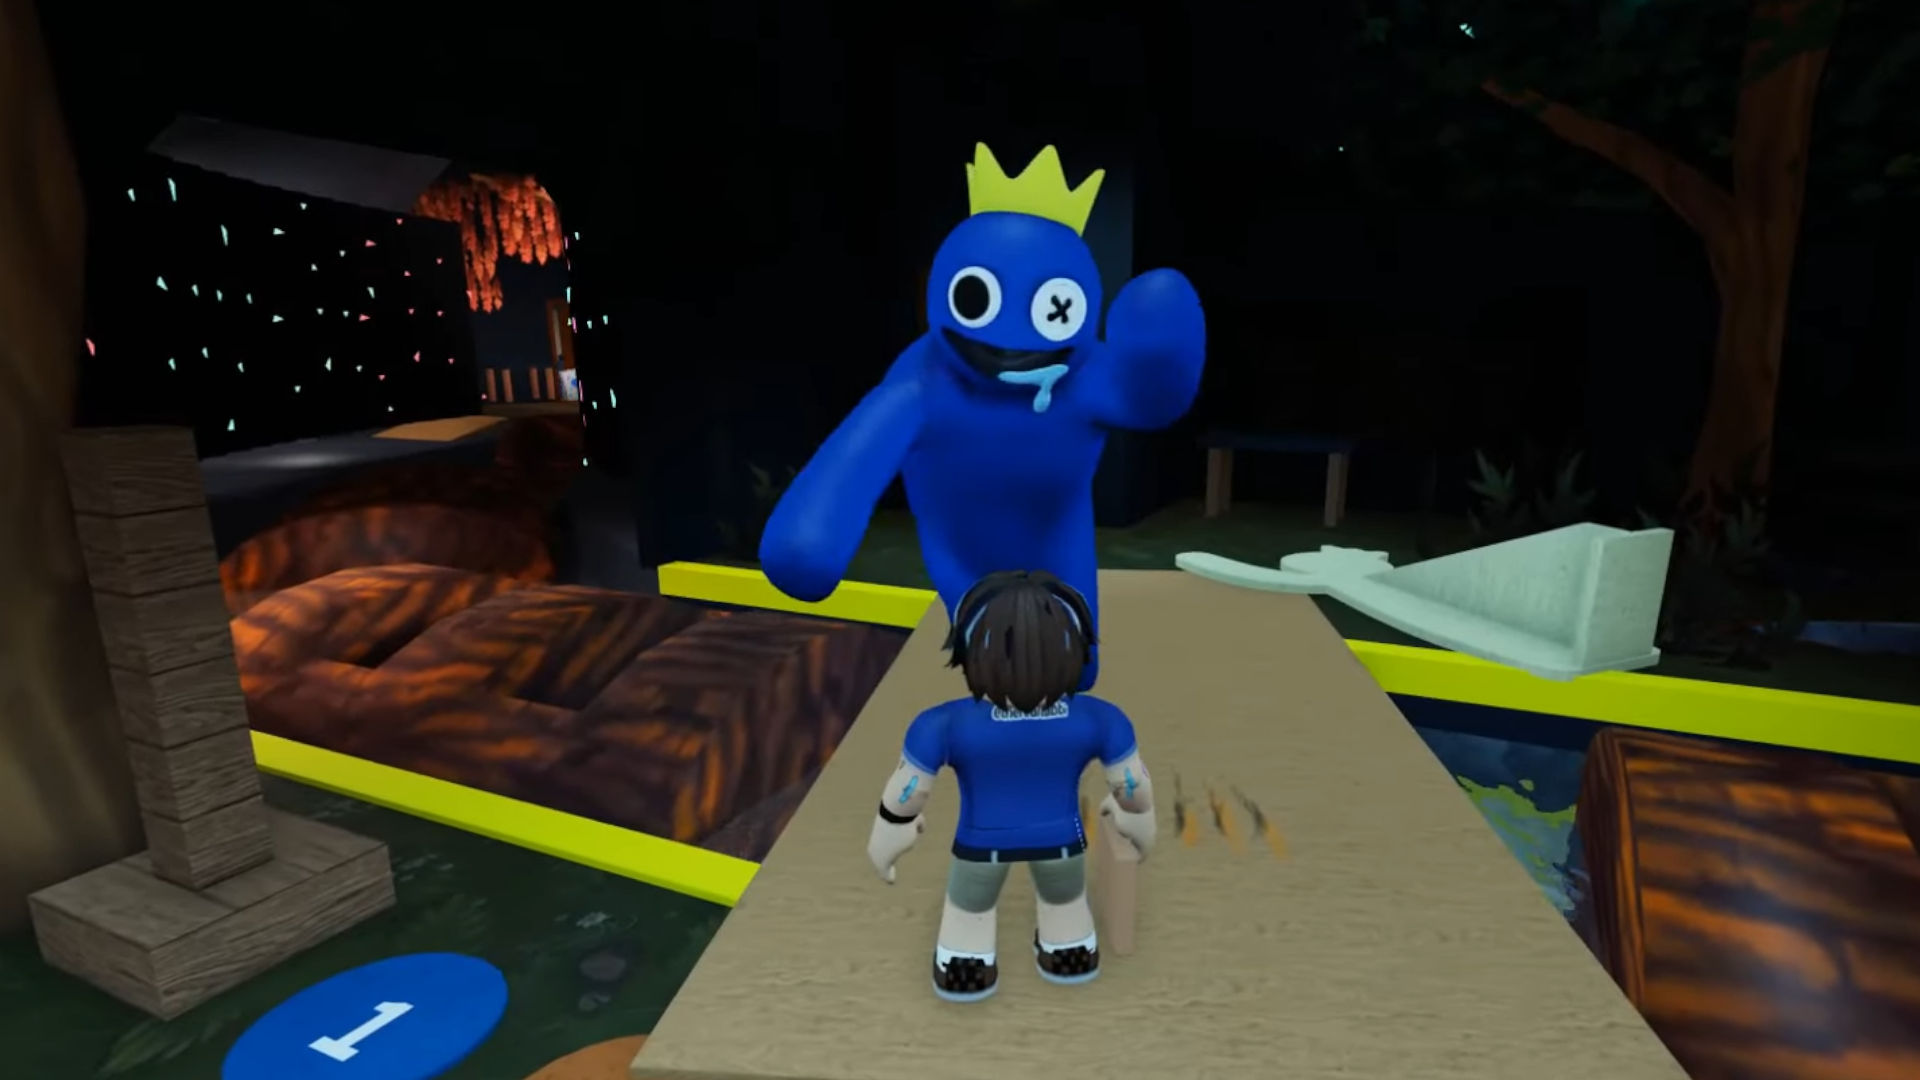 One of the Rainbow Friends characters, Blue, chasing the player